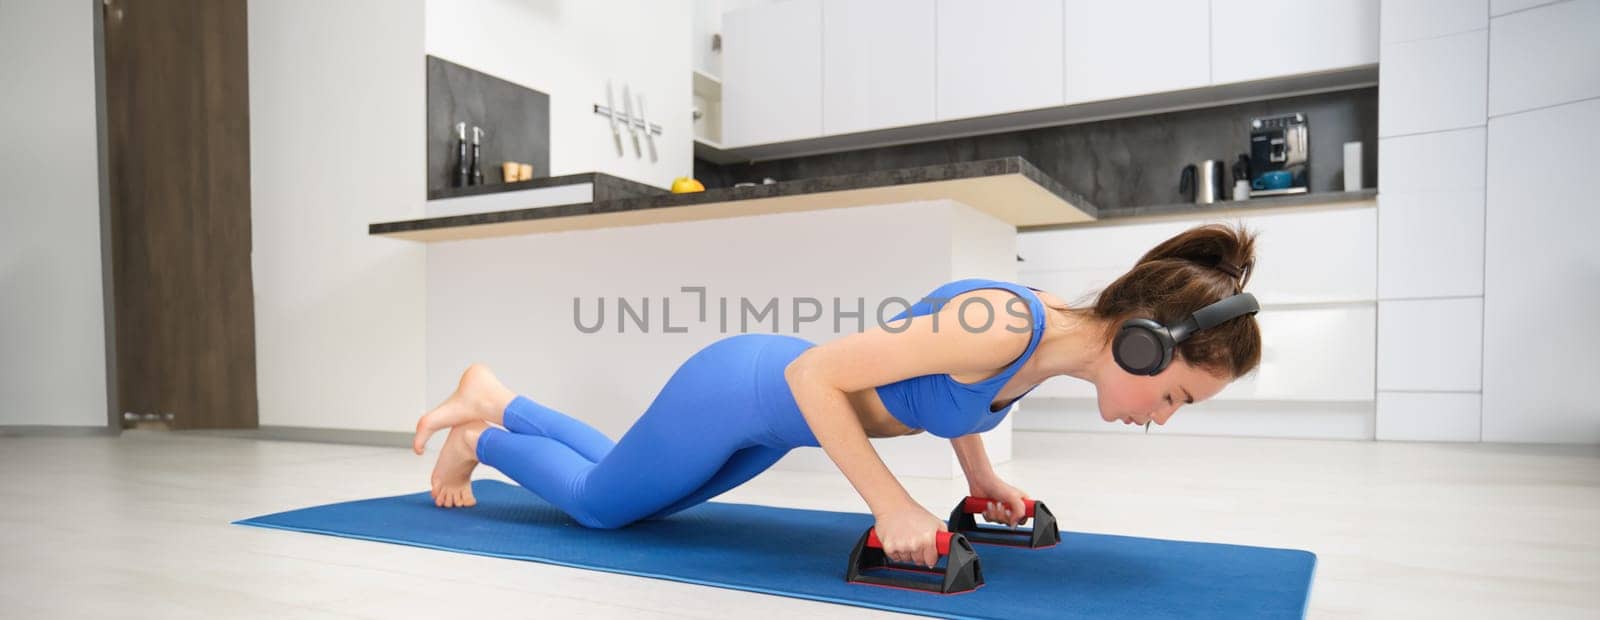 Portrait of fitness woman in leggings, doing push-up with sports equpment, workout from home, standing on yoga mat in living room, listening music in headphones.